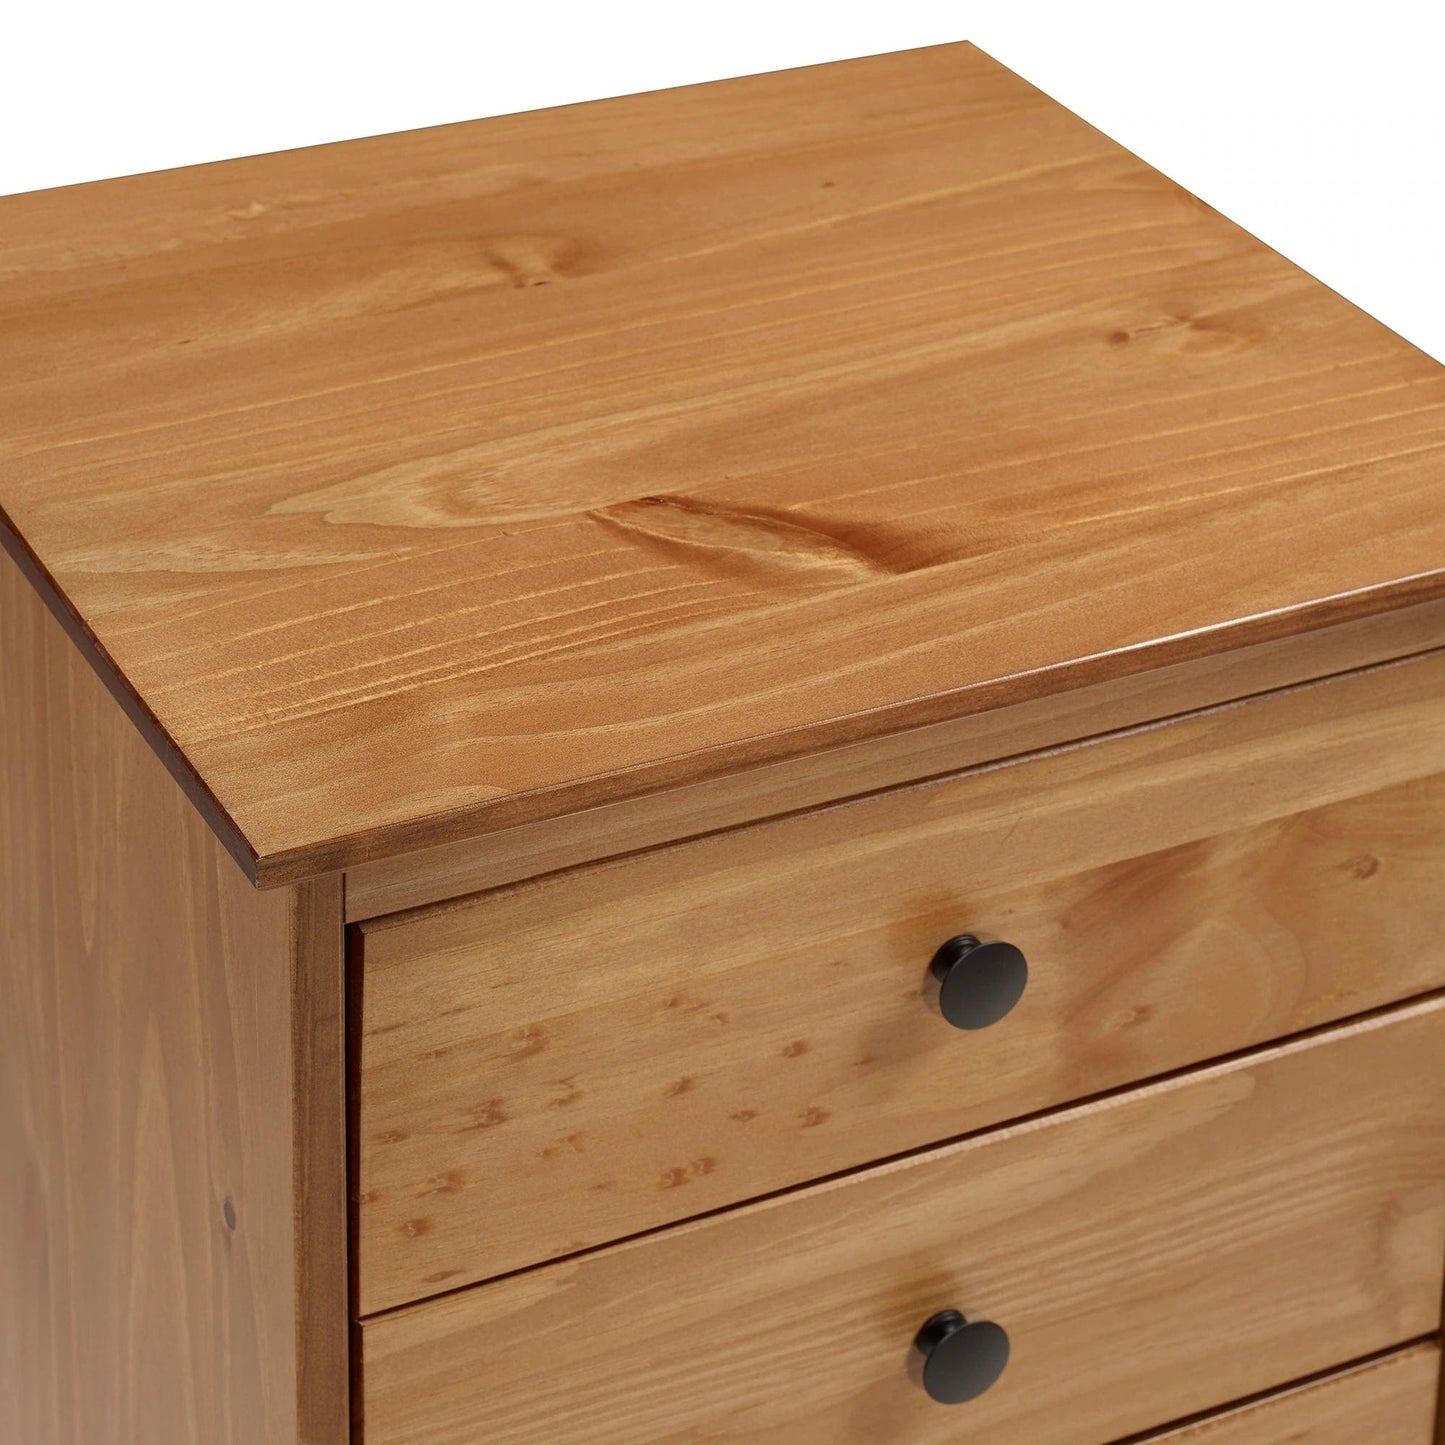 Handmade Customized Wooden 3 Drawer Bedside Table